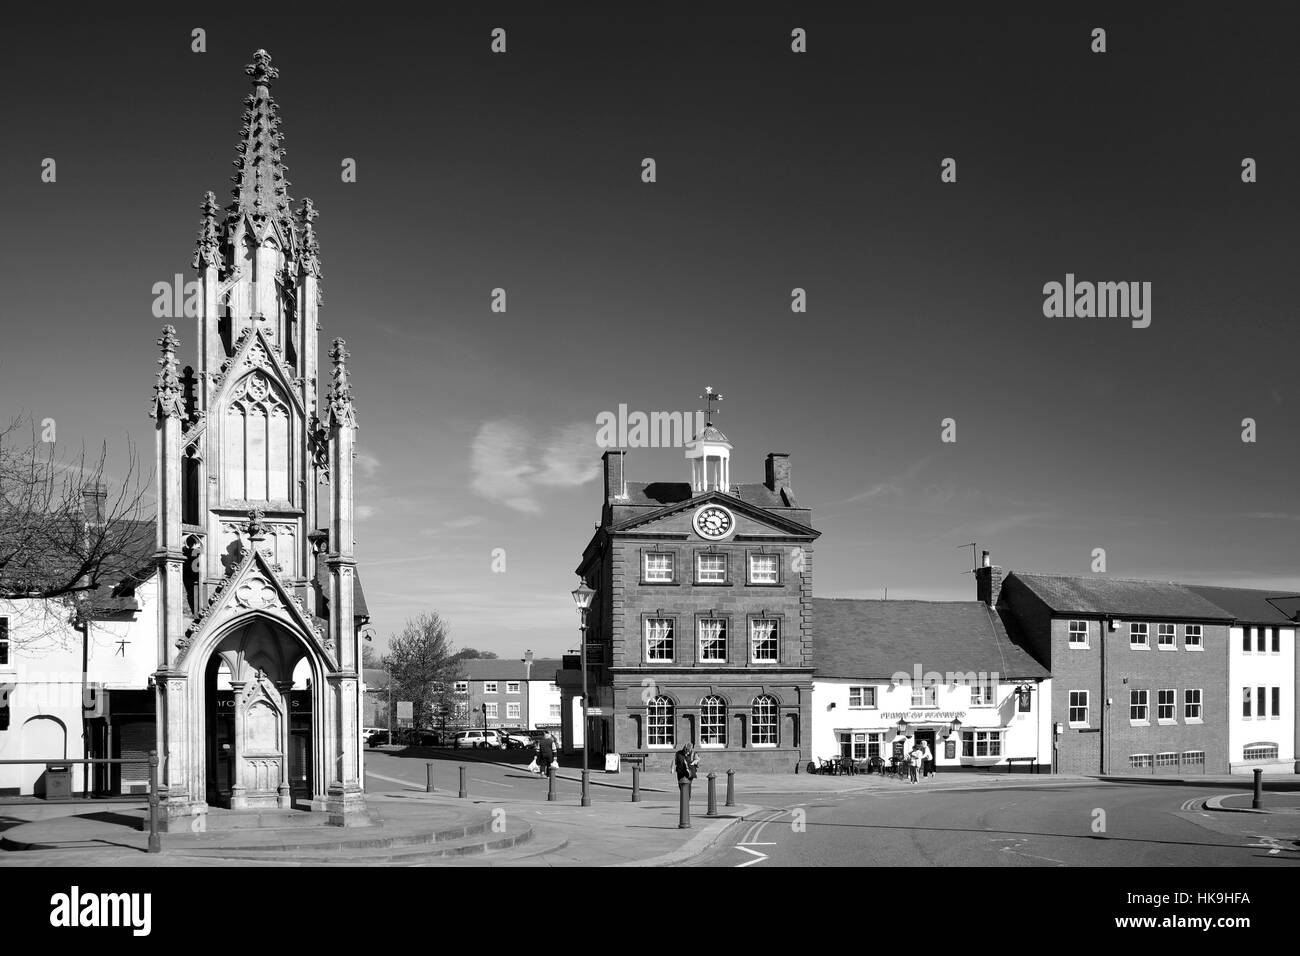 Summer; August; September; The Market cross in Daventry town, Northamptonshire, England, UK Stock Photo